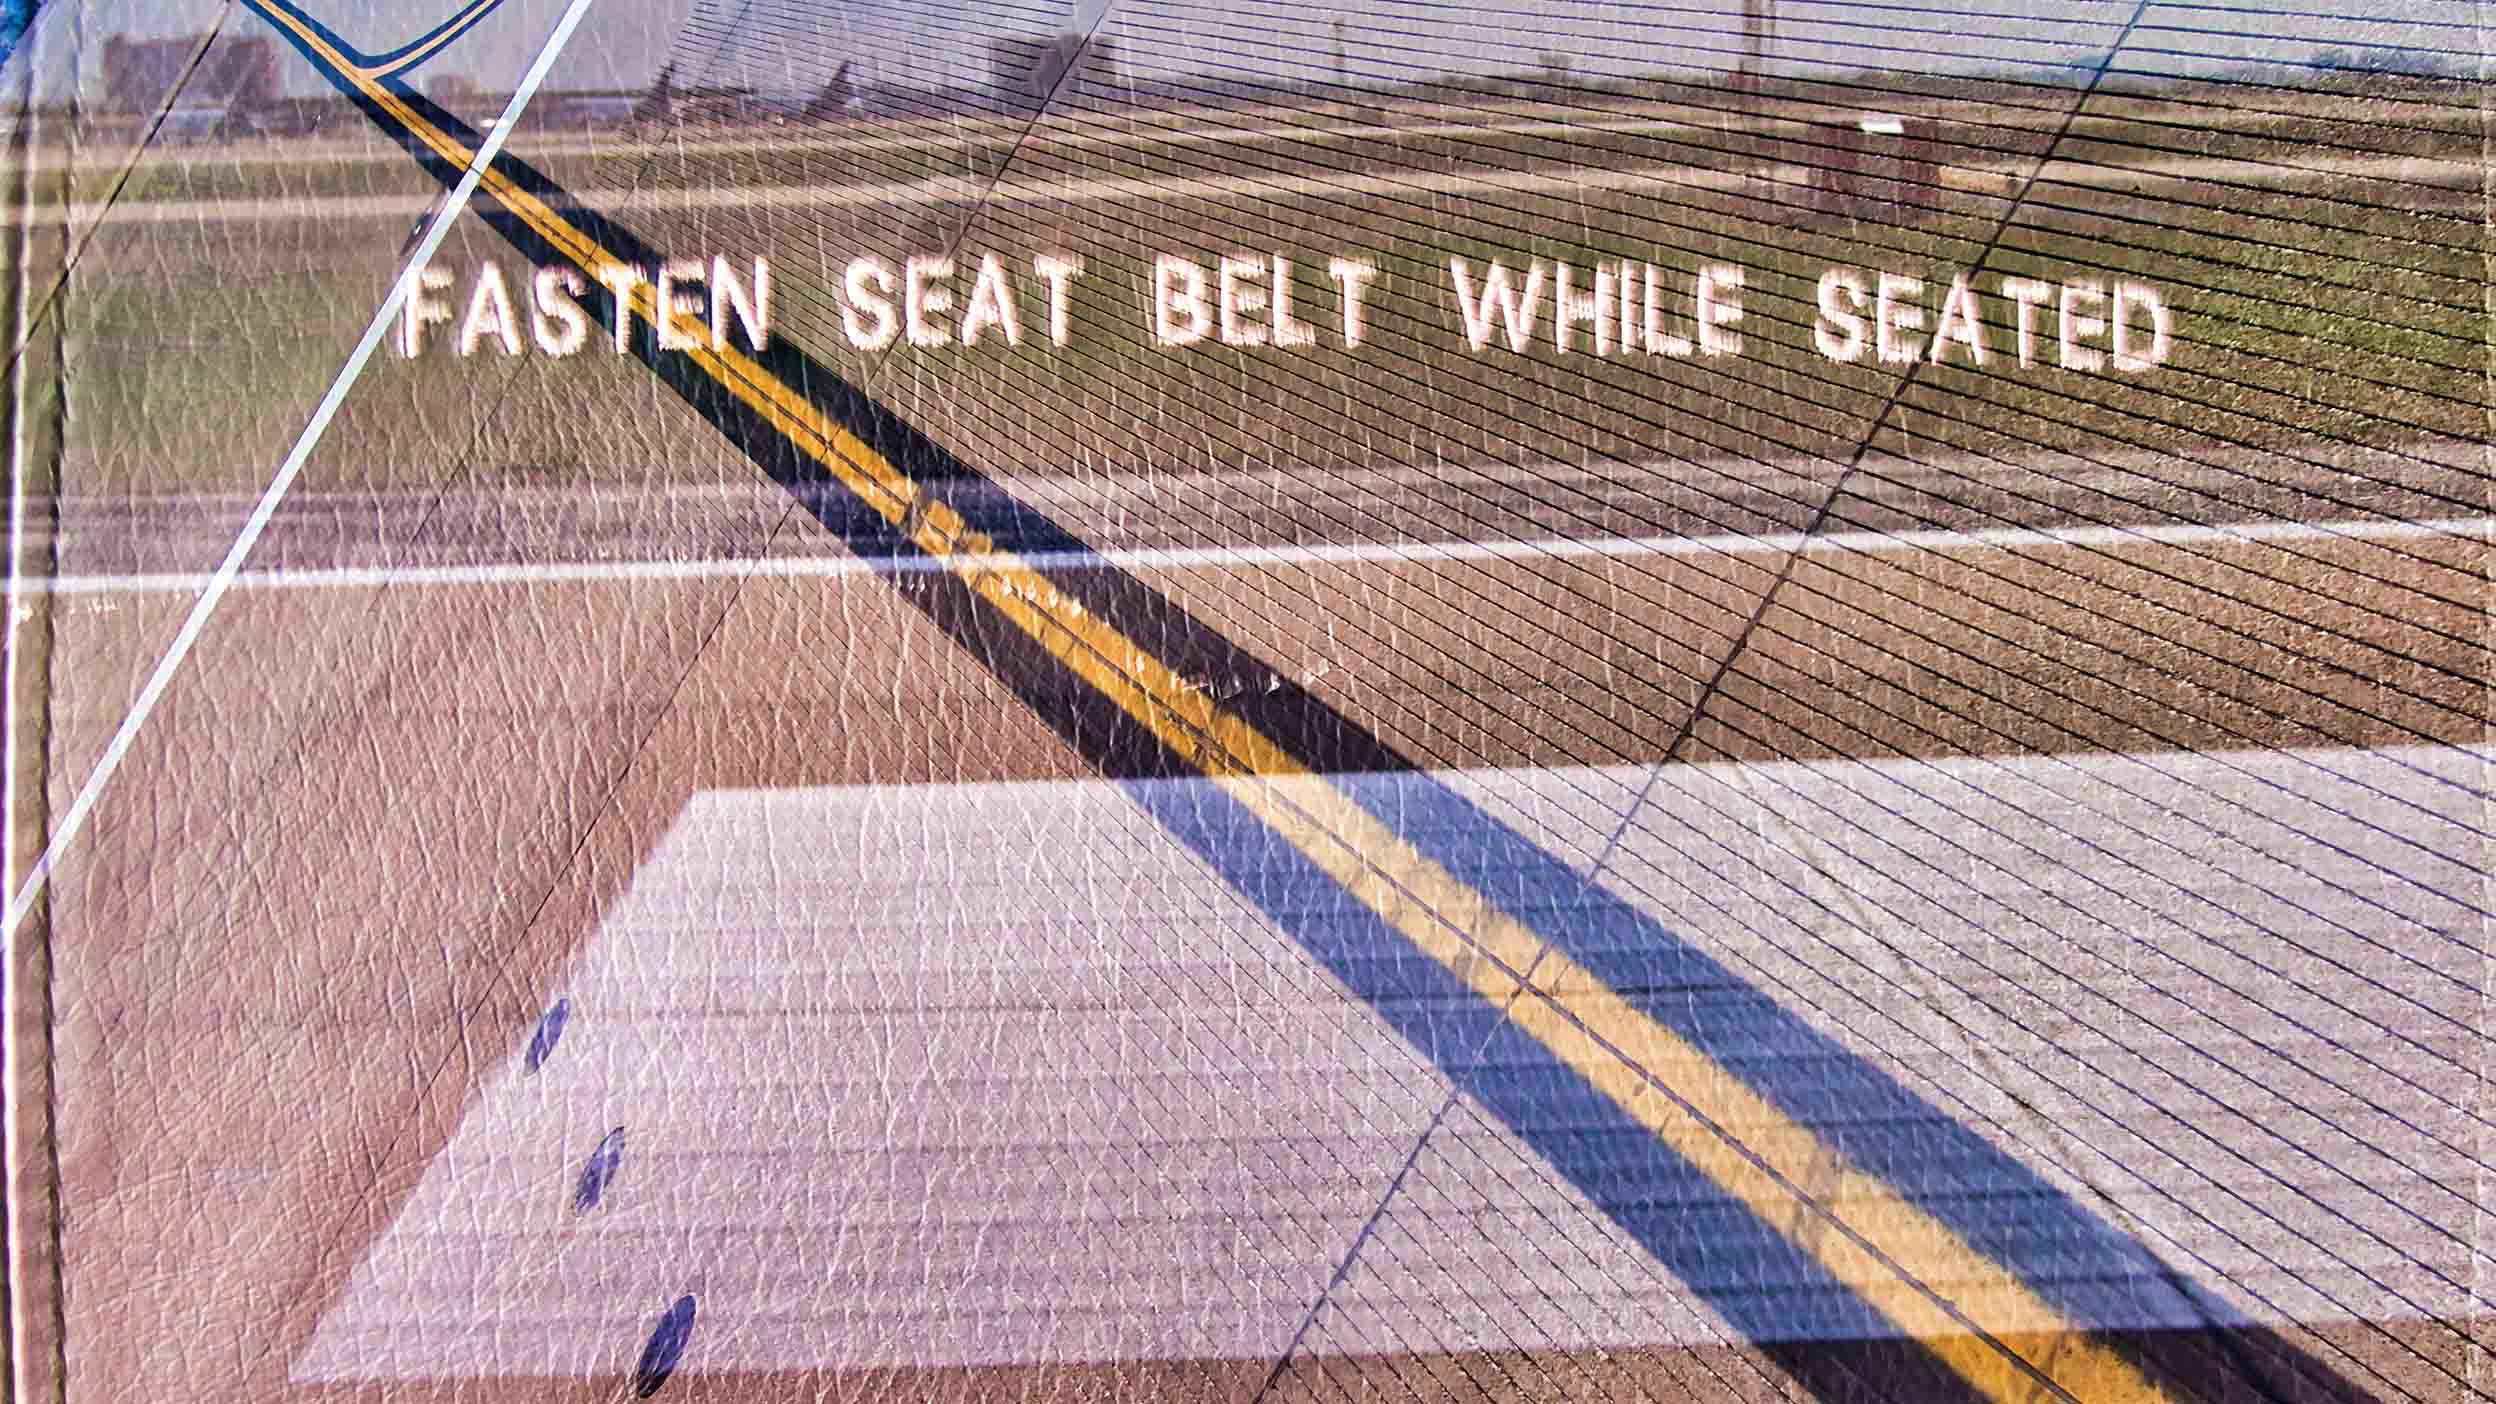 Message to fasten seat belt while seated